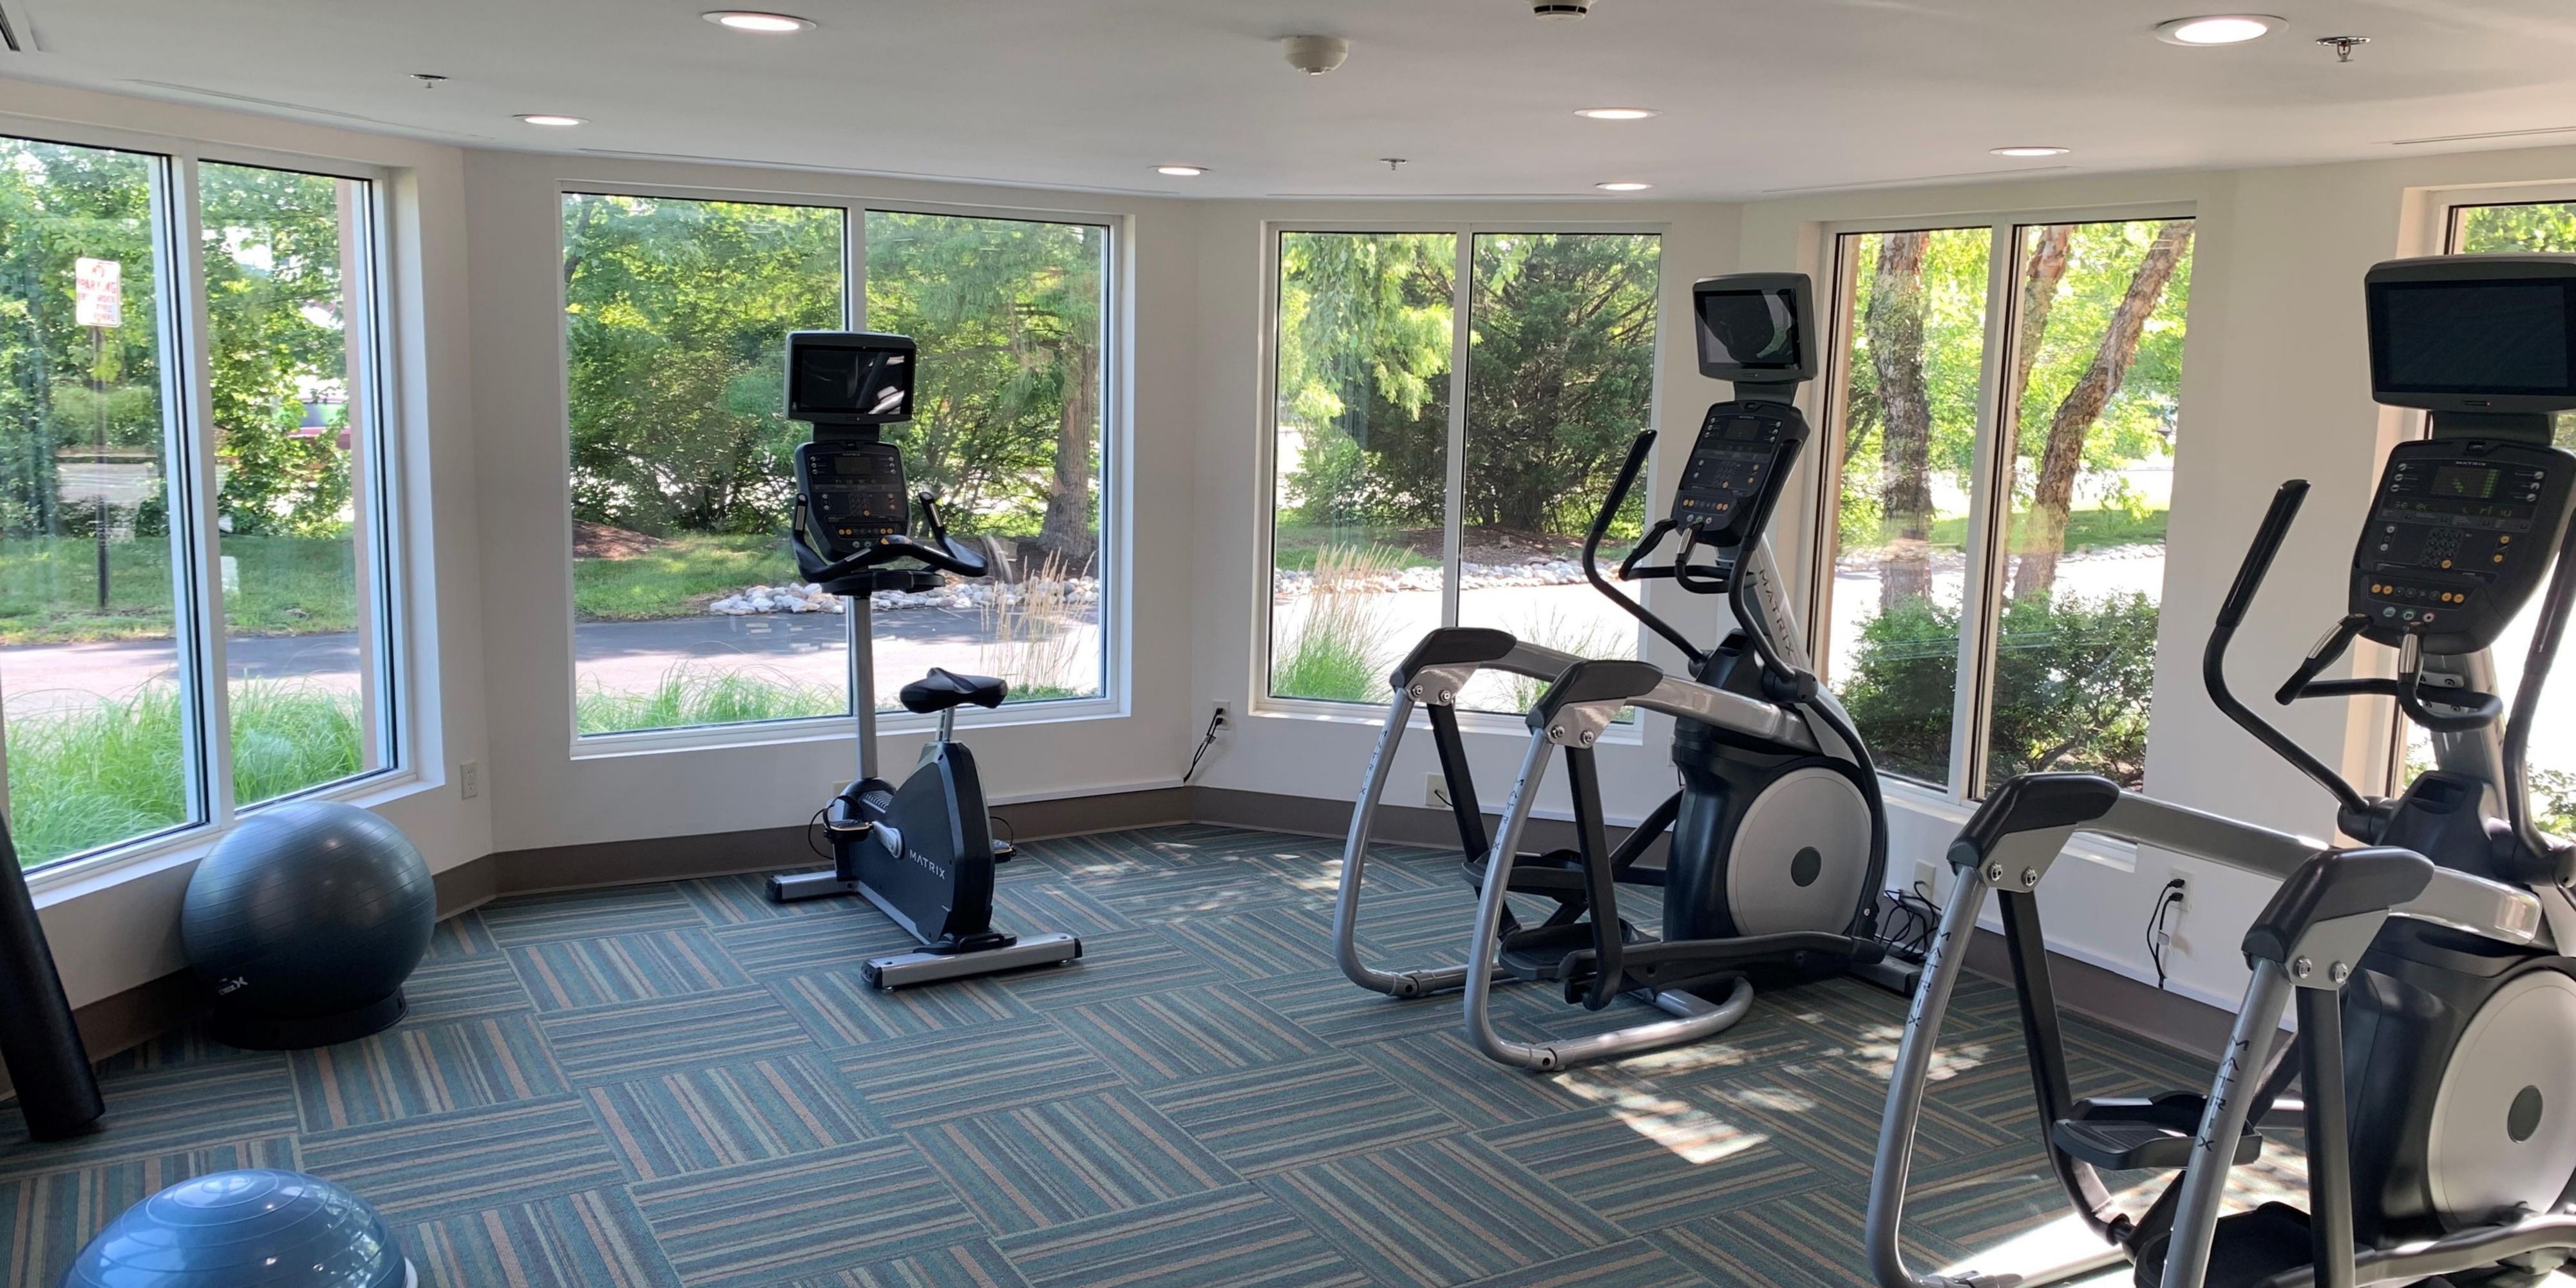 We are proud to announce that we have tripled the size of our fitness center to meet all of your needs while you are on the road. With the addition of more cardio equipment including a rowing machine, we have also added an additional weight machine and brand new free weights.